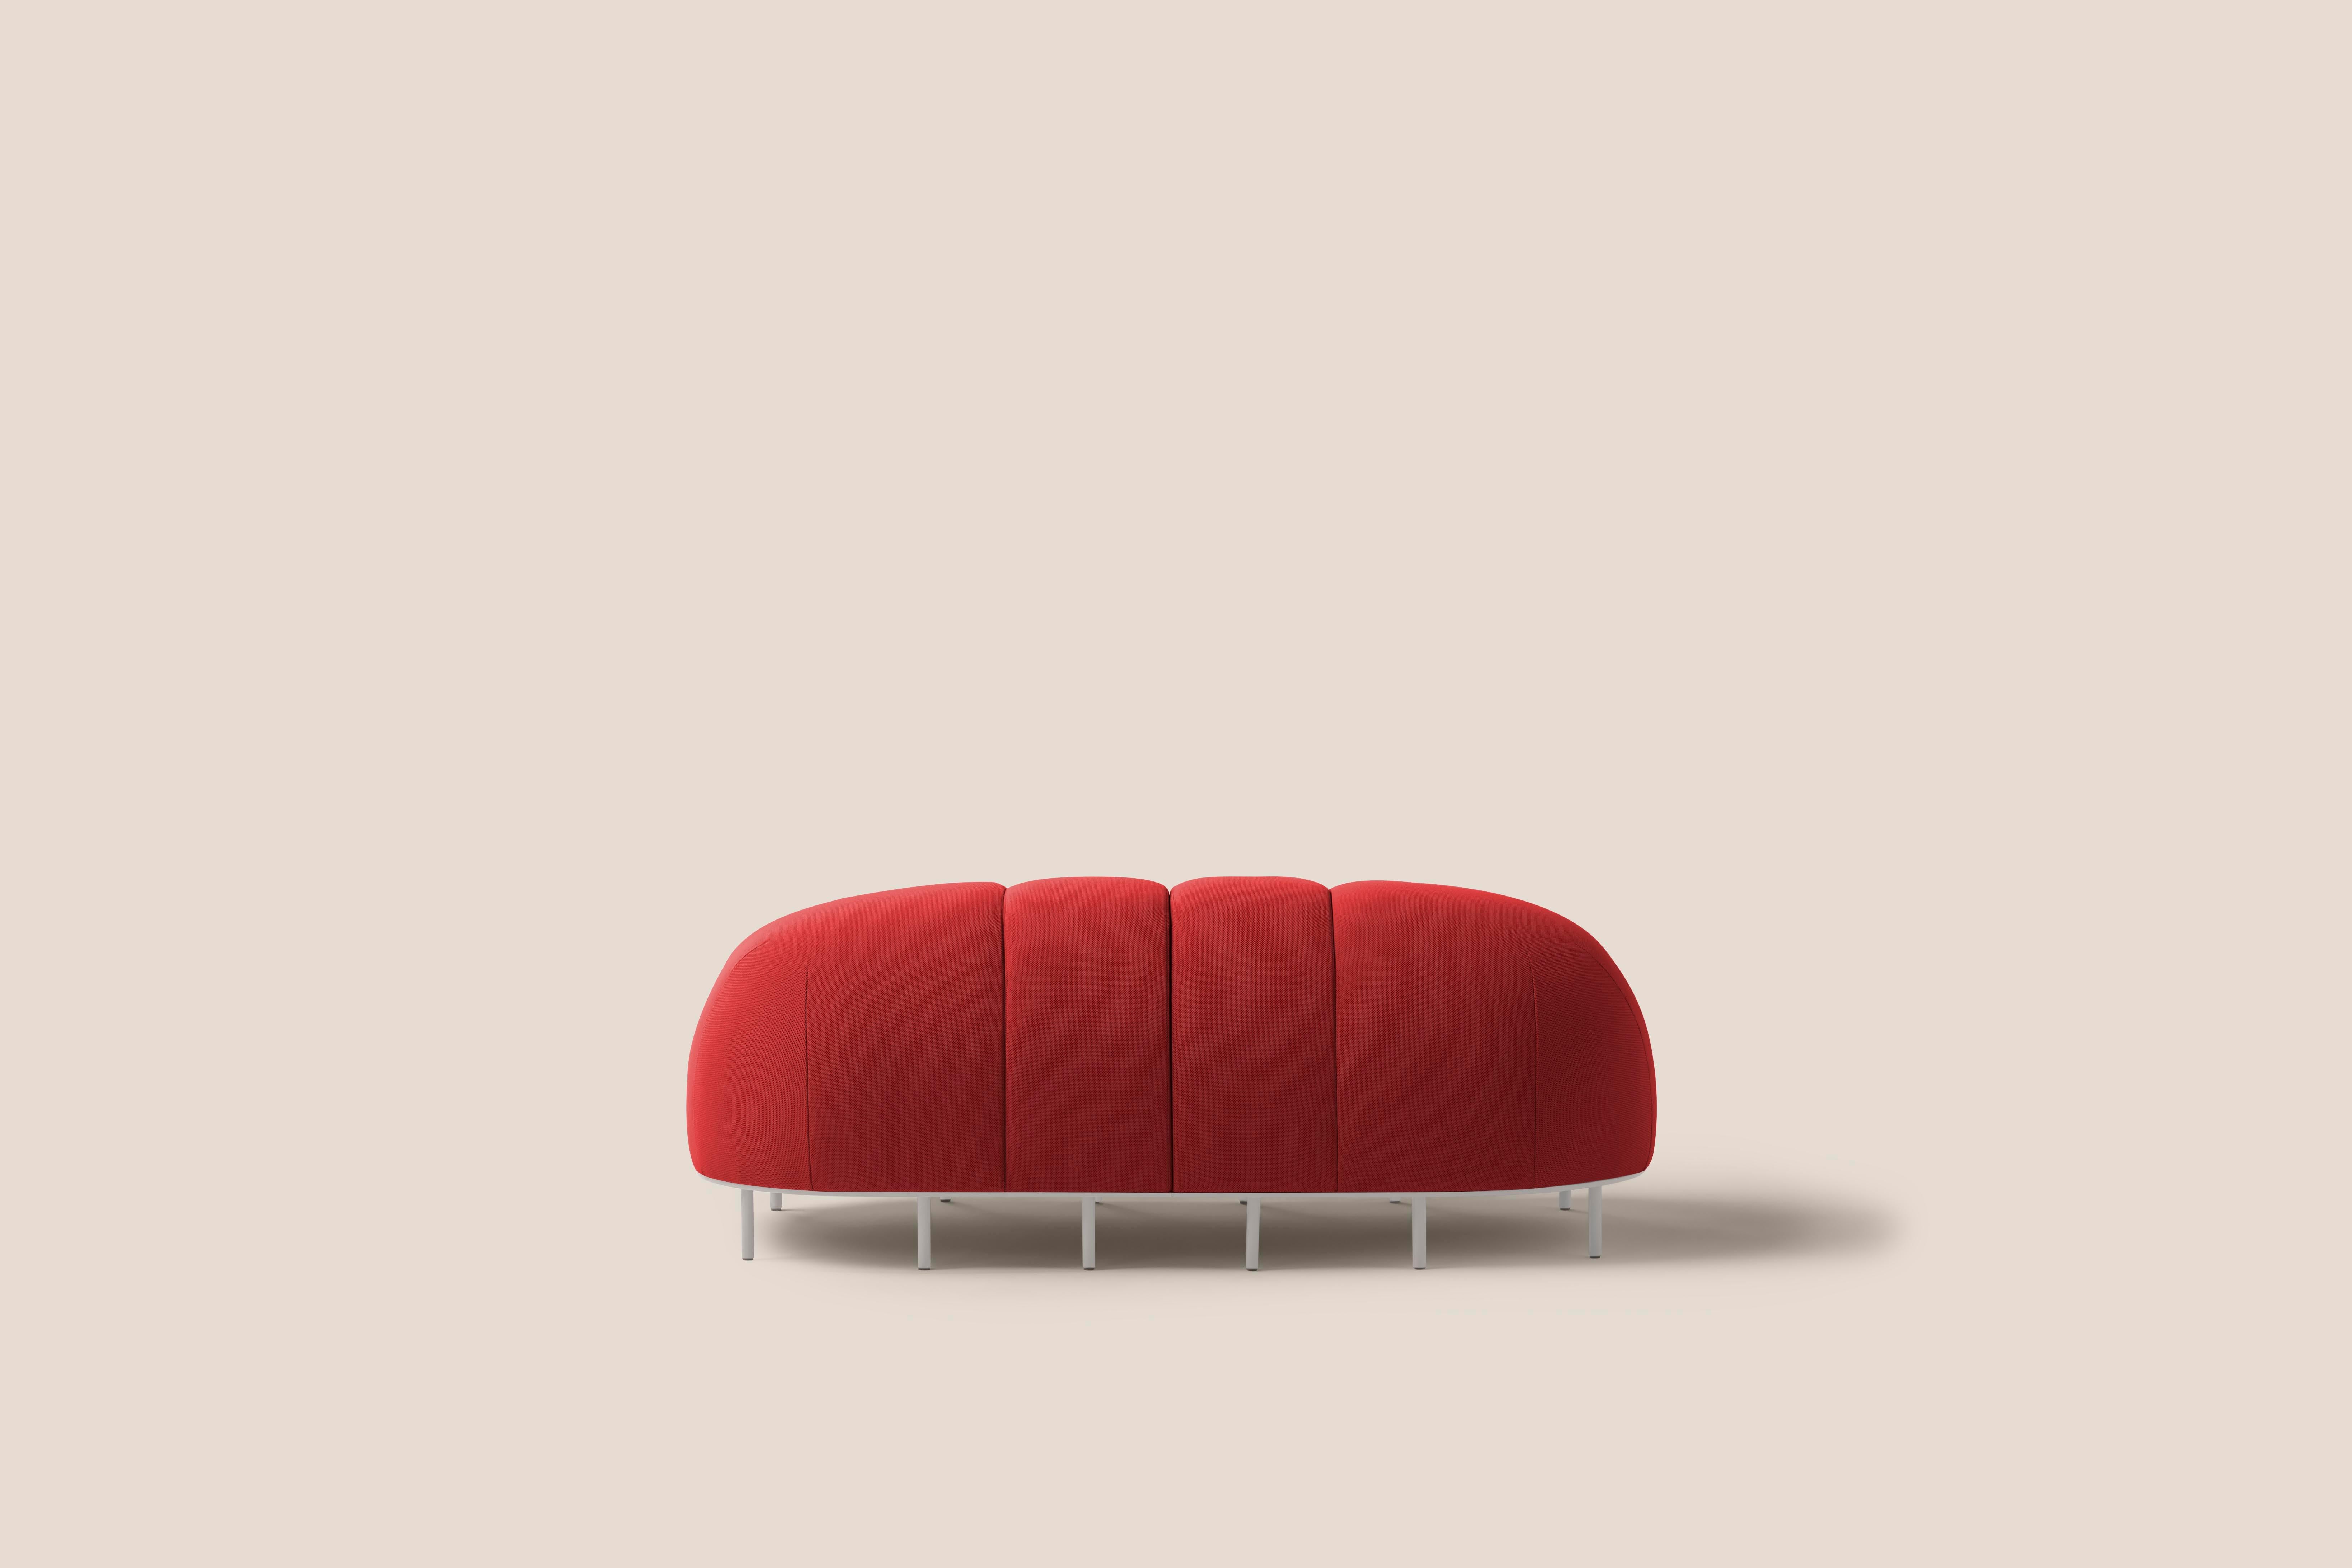 Worm bench I by Pepe Albargues
Dimensions: D 65 x W 130 x H 50 cm
Materials: Plywood, foam CMHR, iron
Available in different colors. Custom modules convinations available.

2 x end module

Worm is an amusing bench that can evolve and change